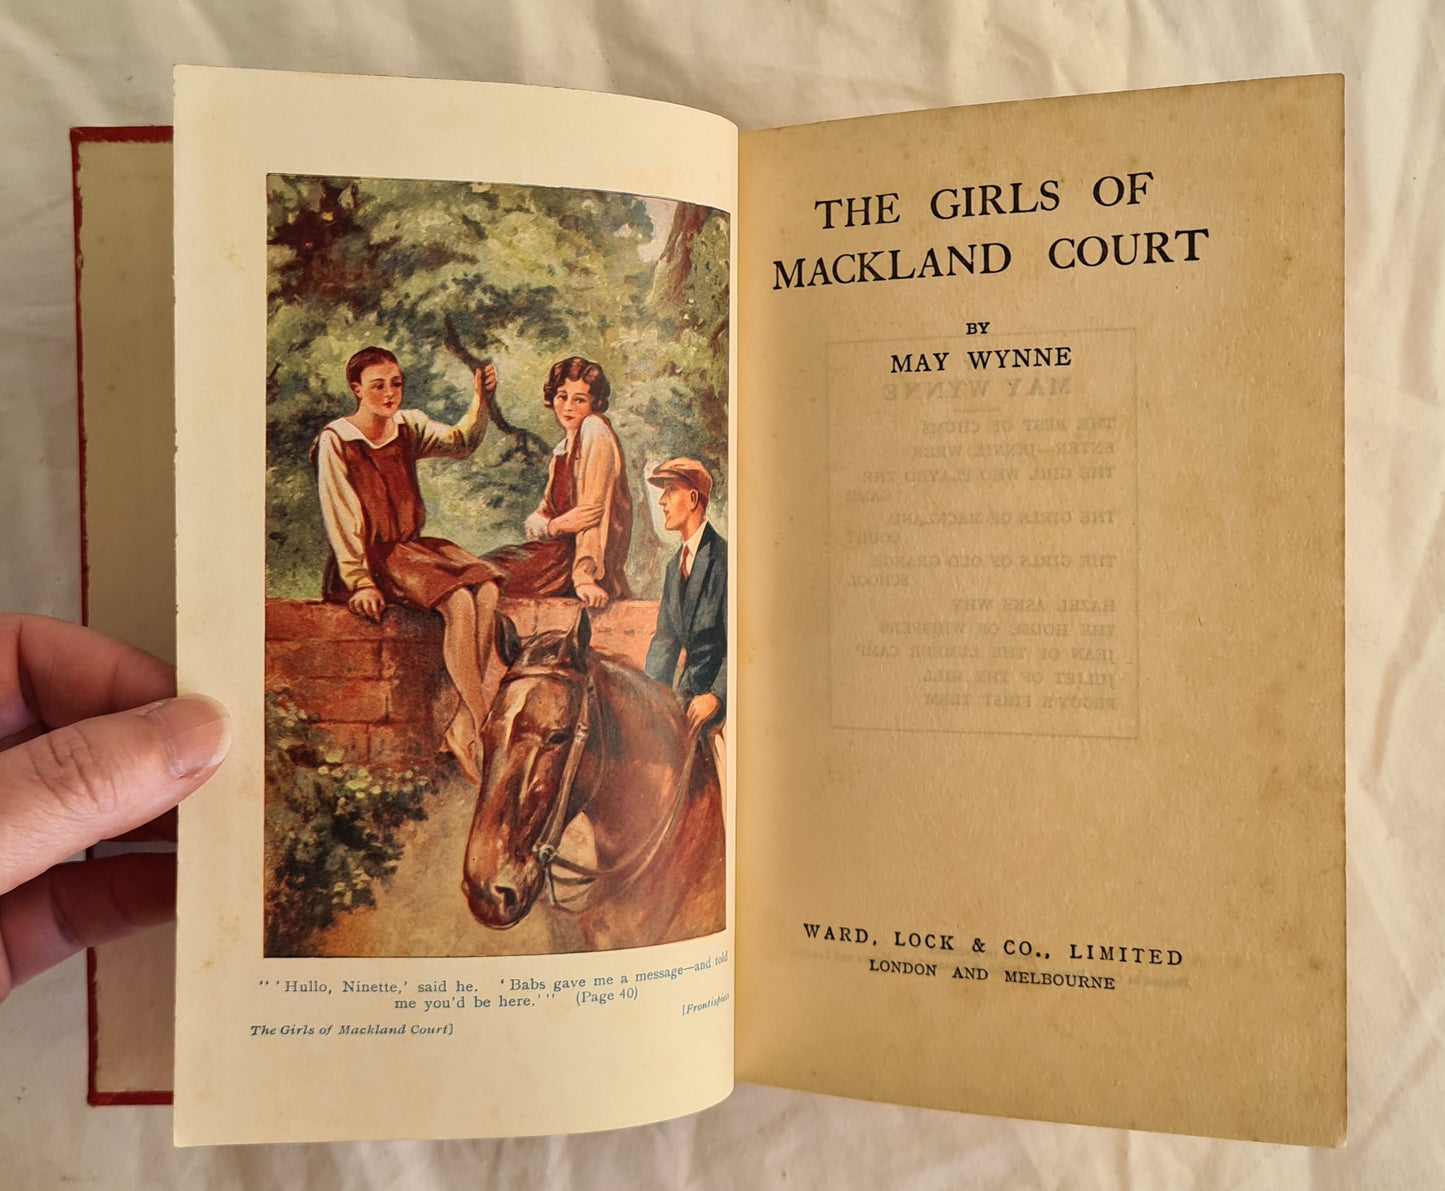 The Girls of Mackland Court by May Wynne